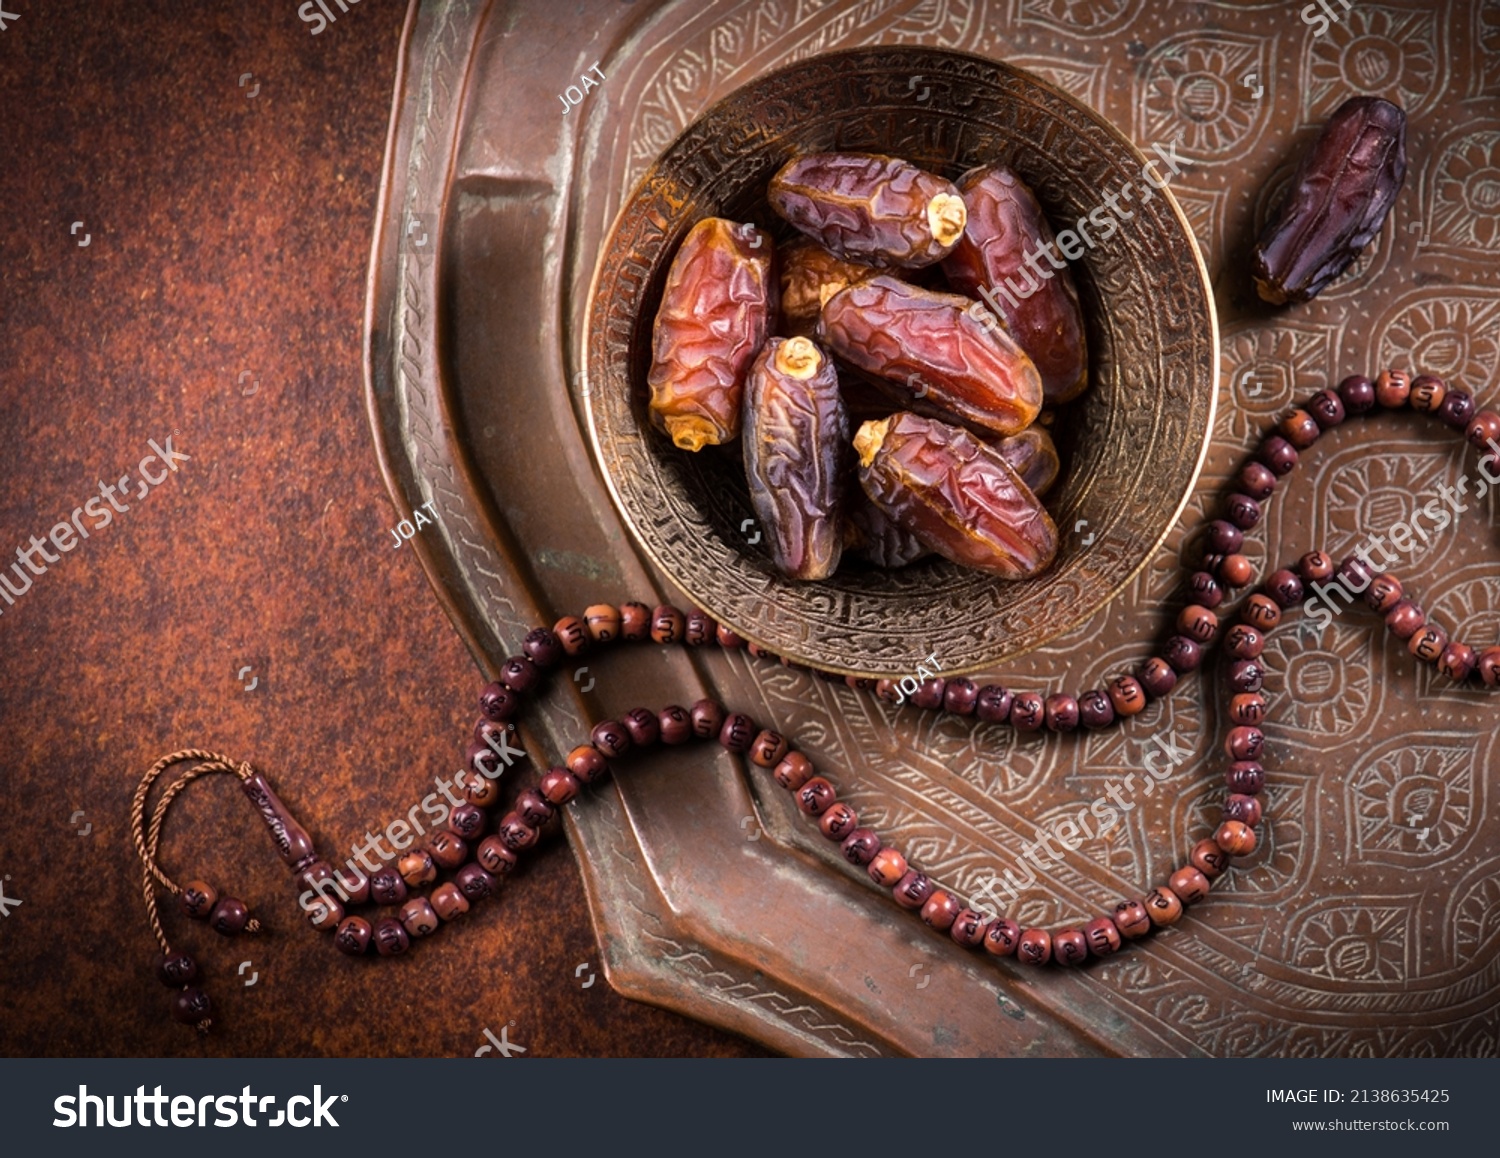 Arabian dates in an antique metal bowl with Islamic prayer beads. Ramadan Kareem- Muslim festival objects and background.
 #2138635425